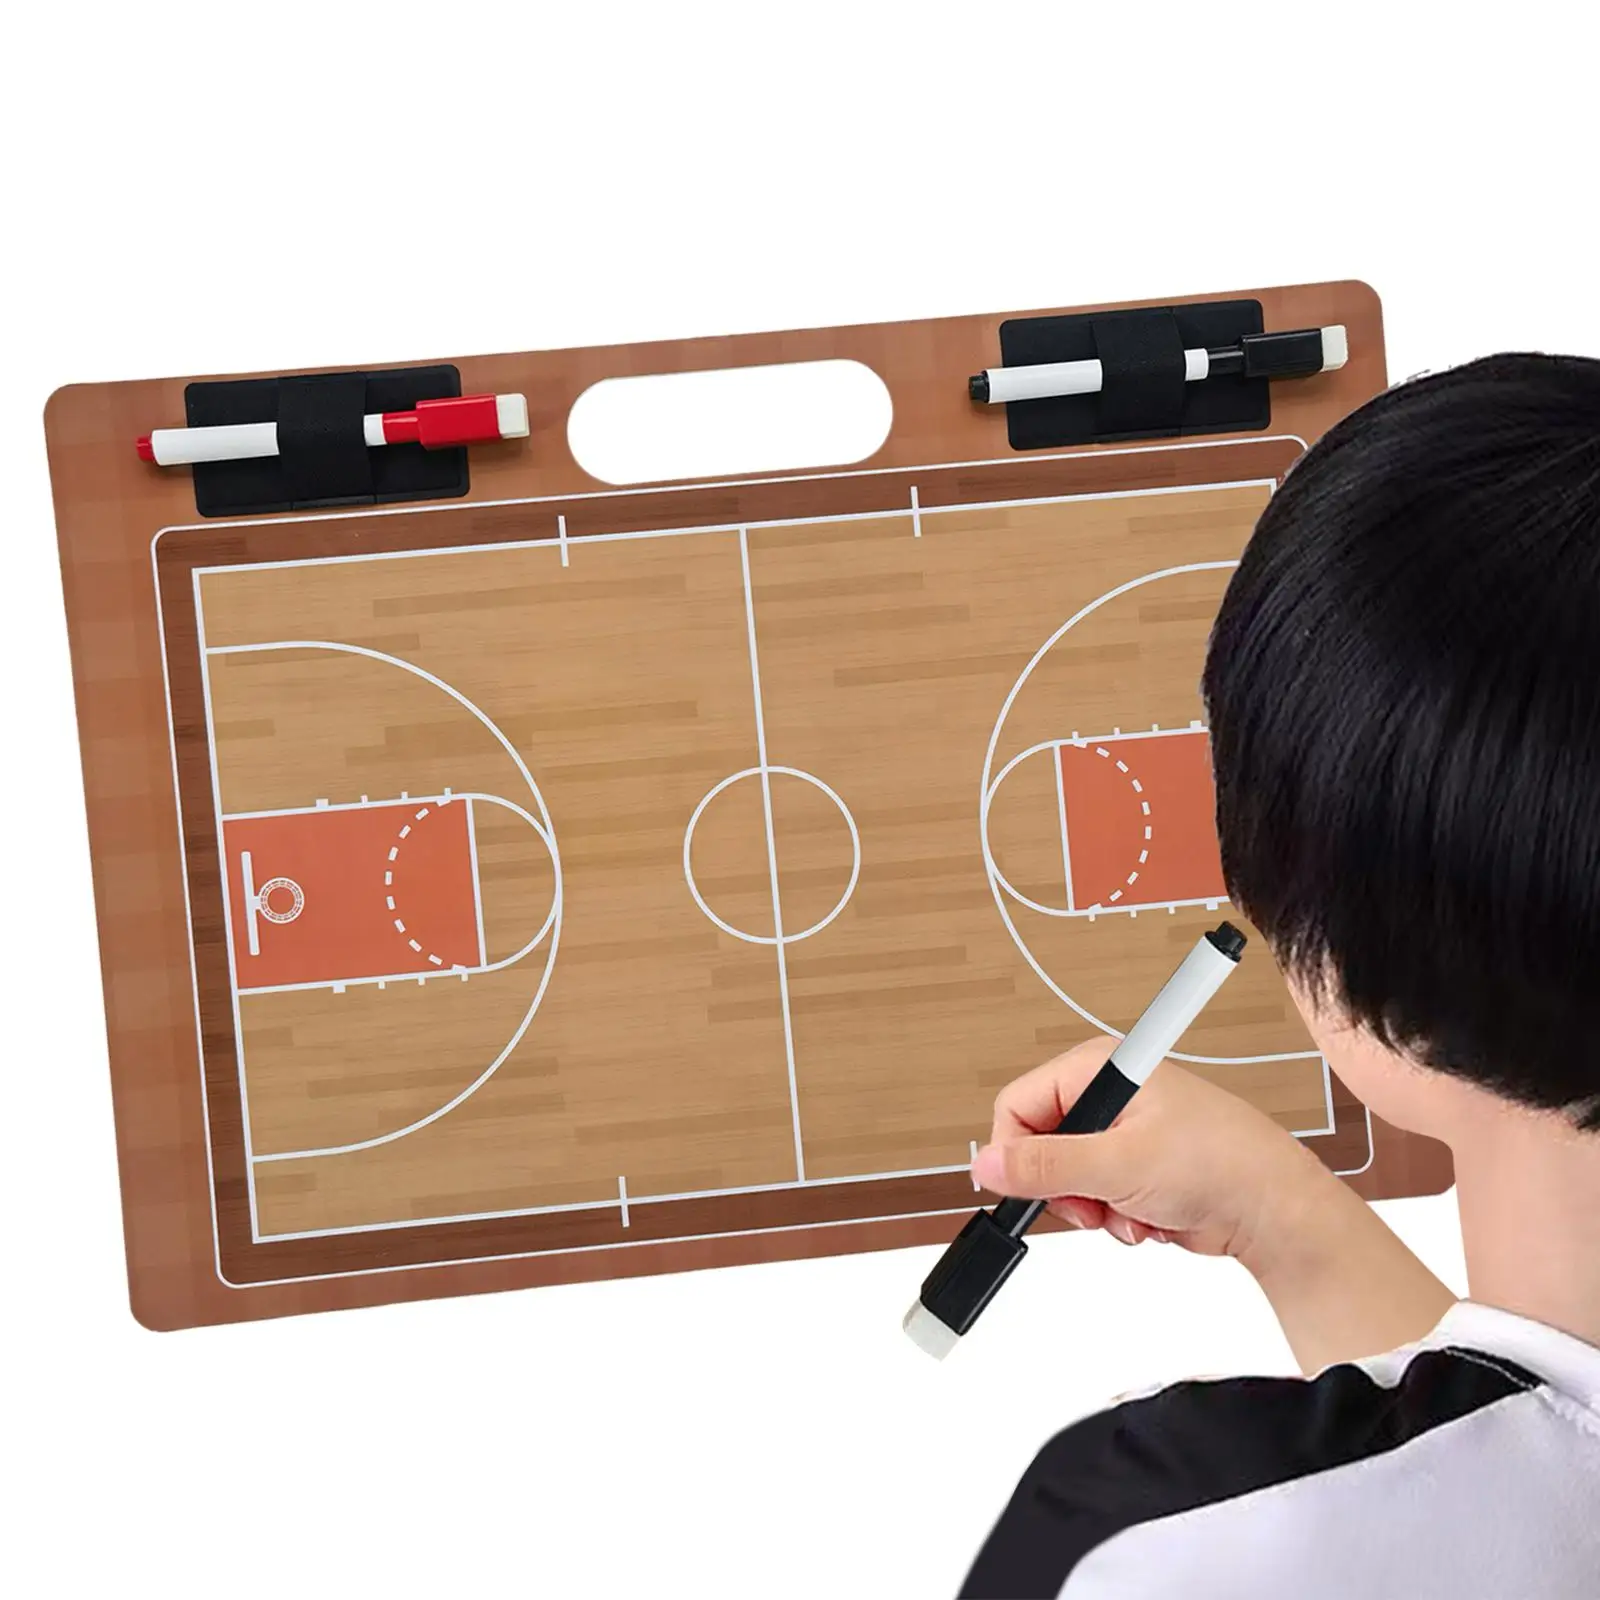 Basketball Clipboard Gift Play Board Equipment White Board Basketball Coaching Board Coaches Boards Dry Erase for Practice Coach